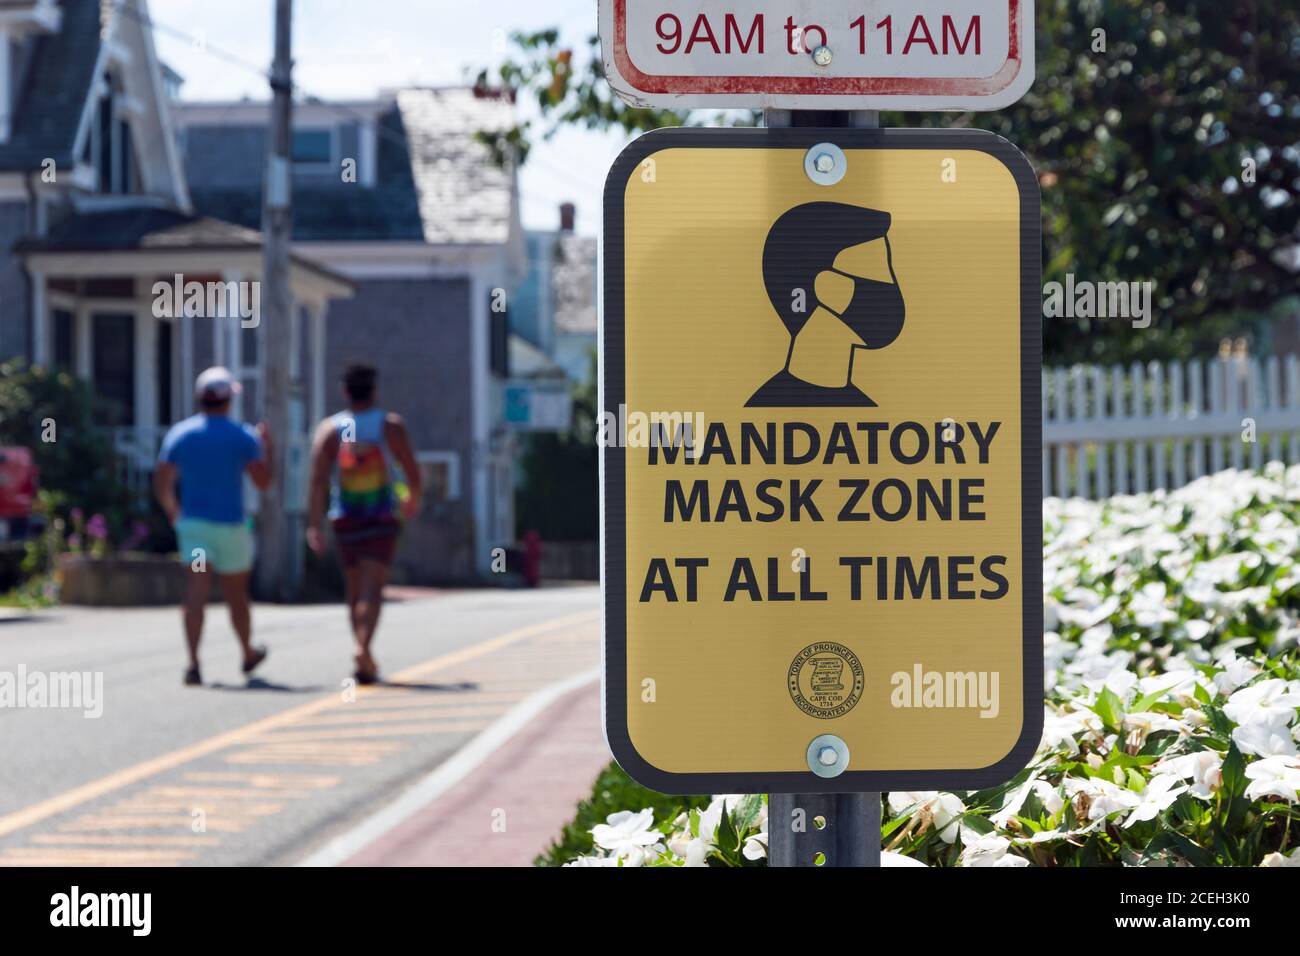 Sign for Mandatory Mask Zone in Provincetown, MA. To prevent spread of Covid-19, people must wear masks in the business district 24 hours a day. Stock Photo